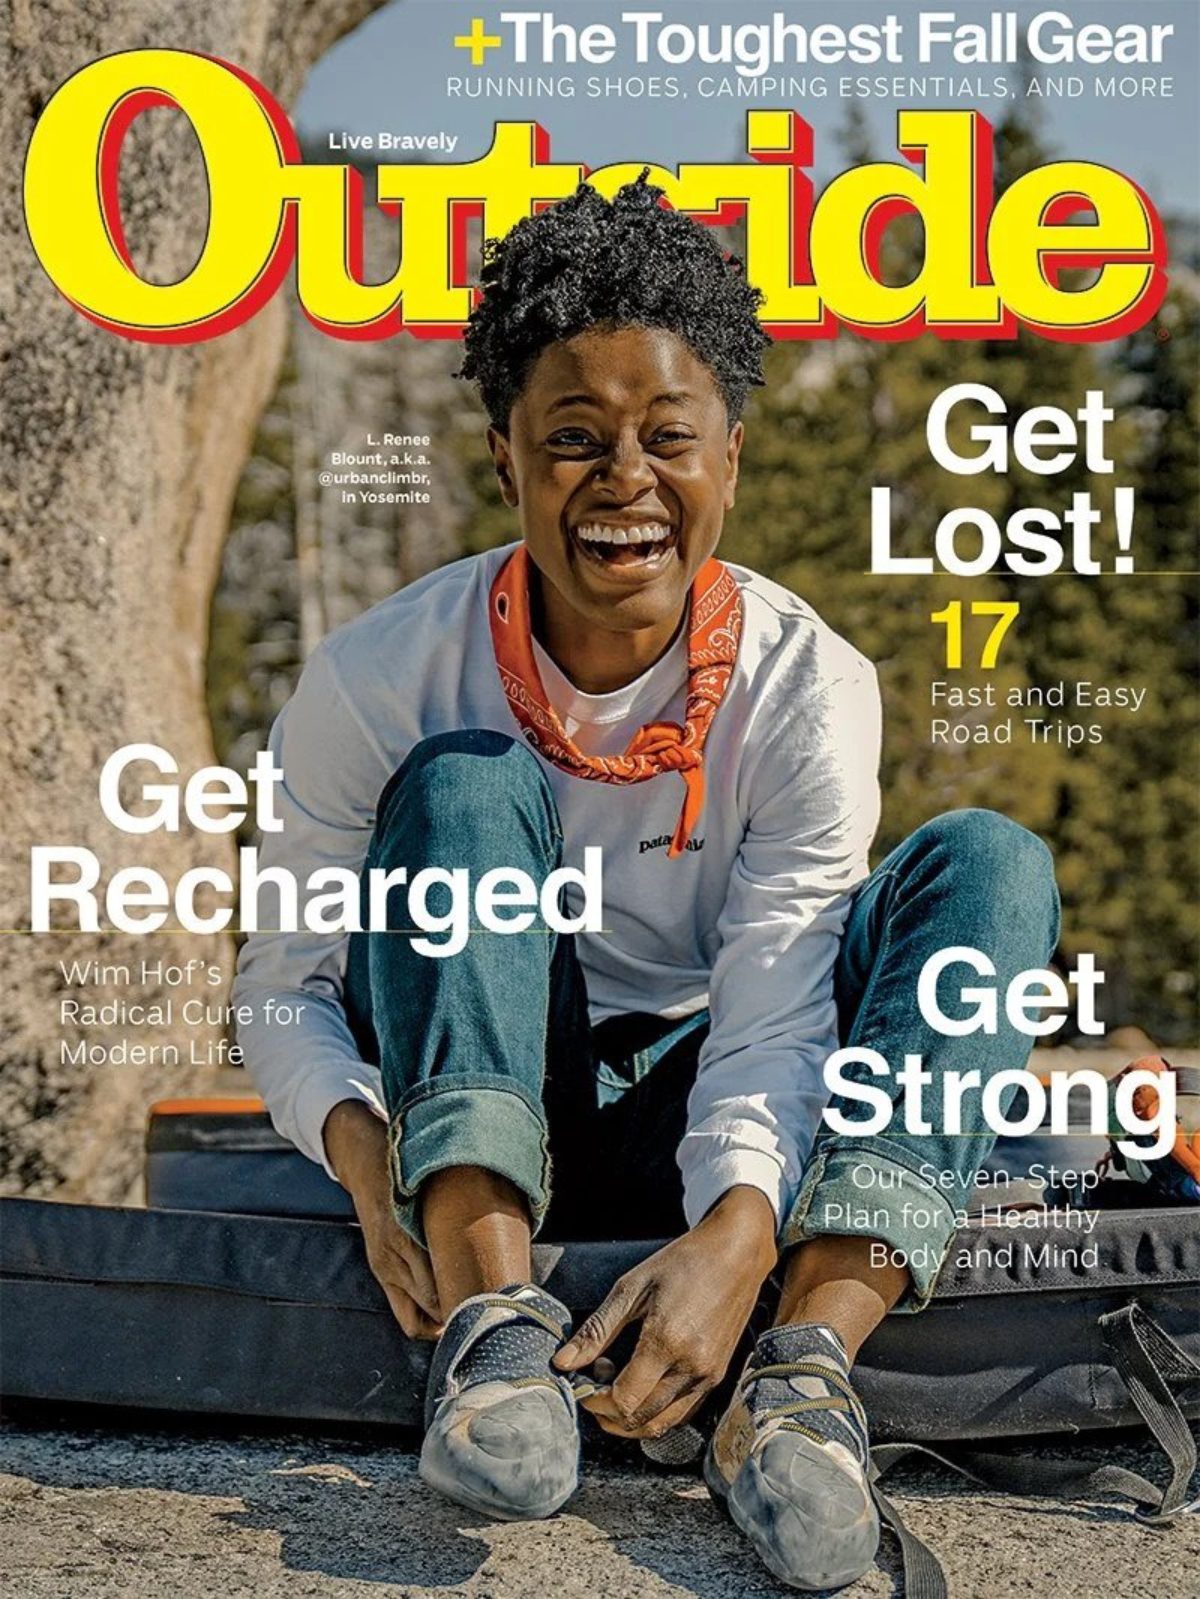 Cover of Outside Magazine featuring L. Blount